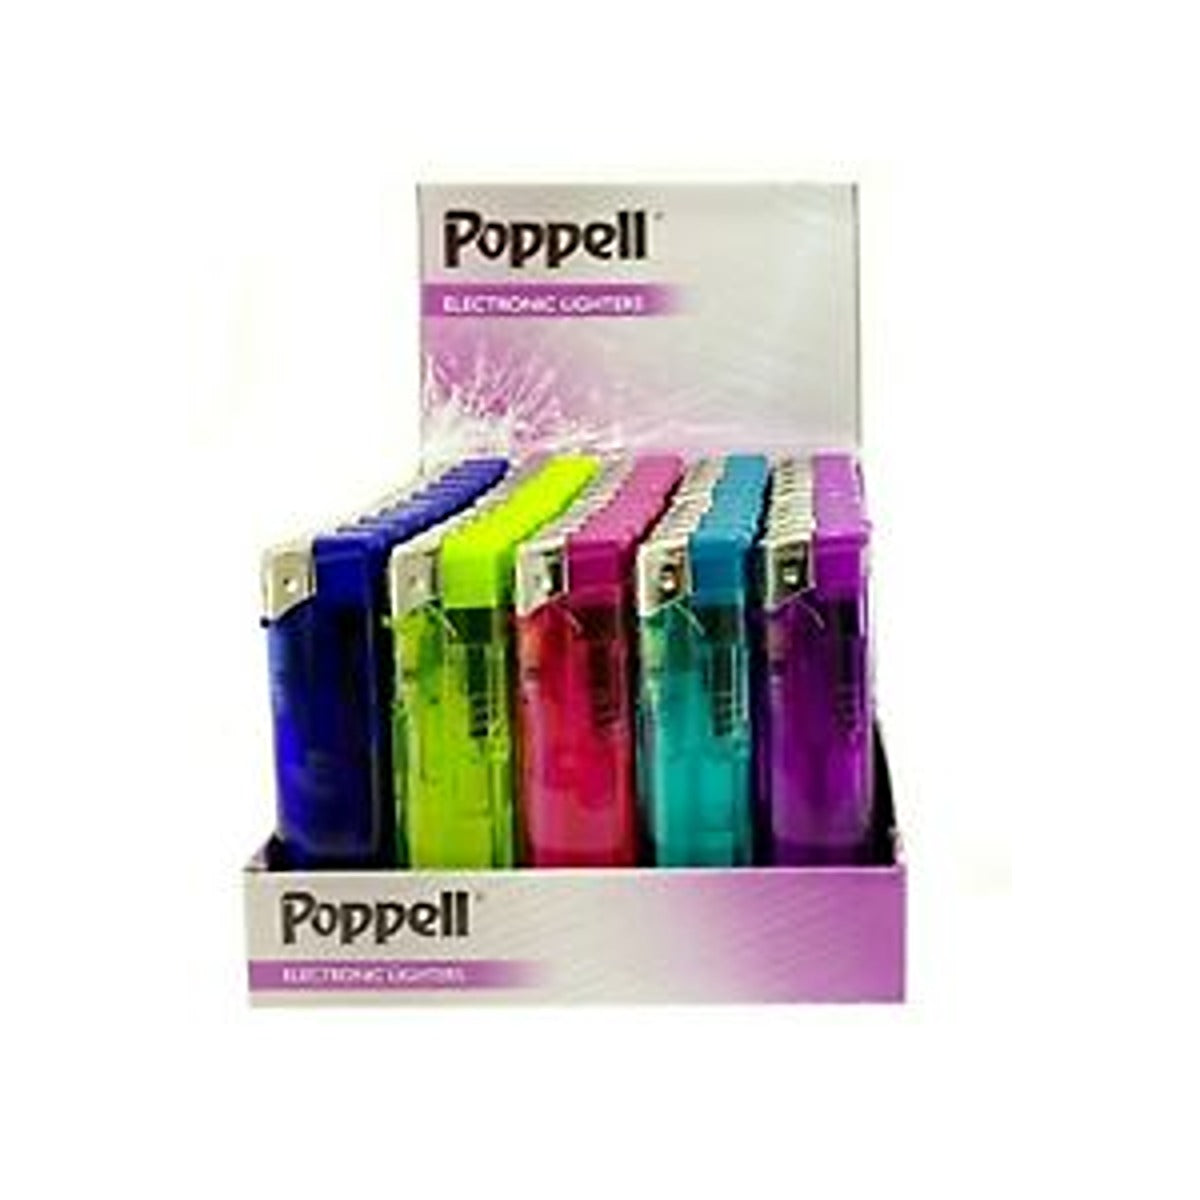 Poppell - Electronic Lighter - Continental Food Store